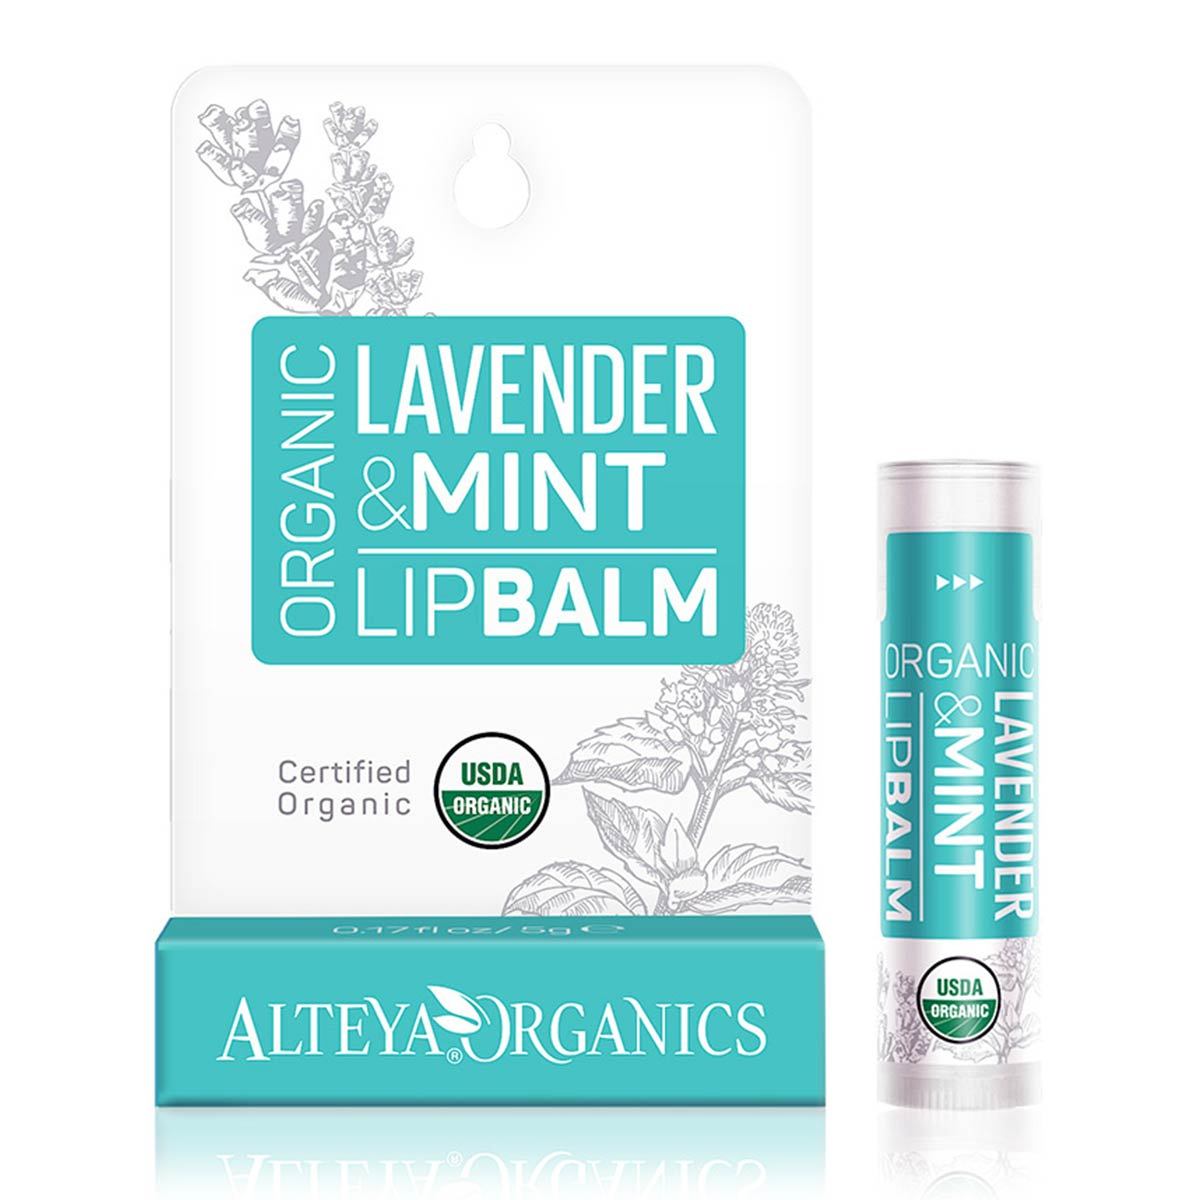 Primary image of Lavender Mint Lip Balm